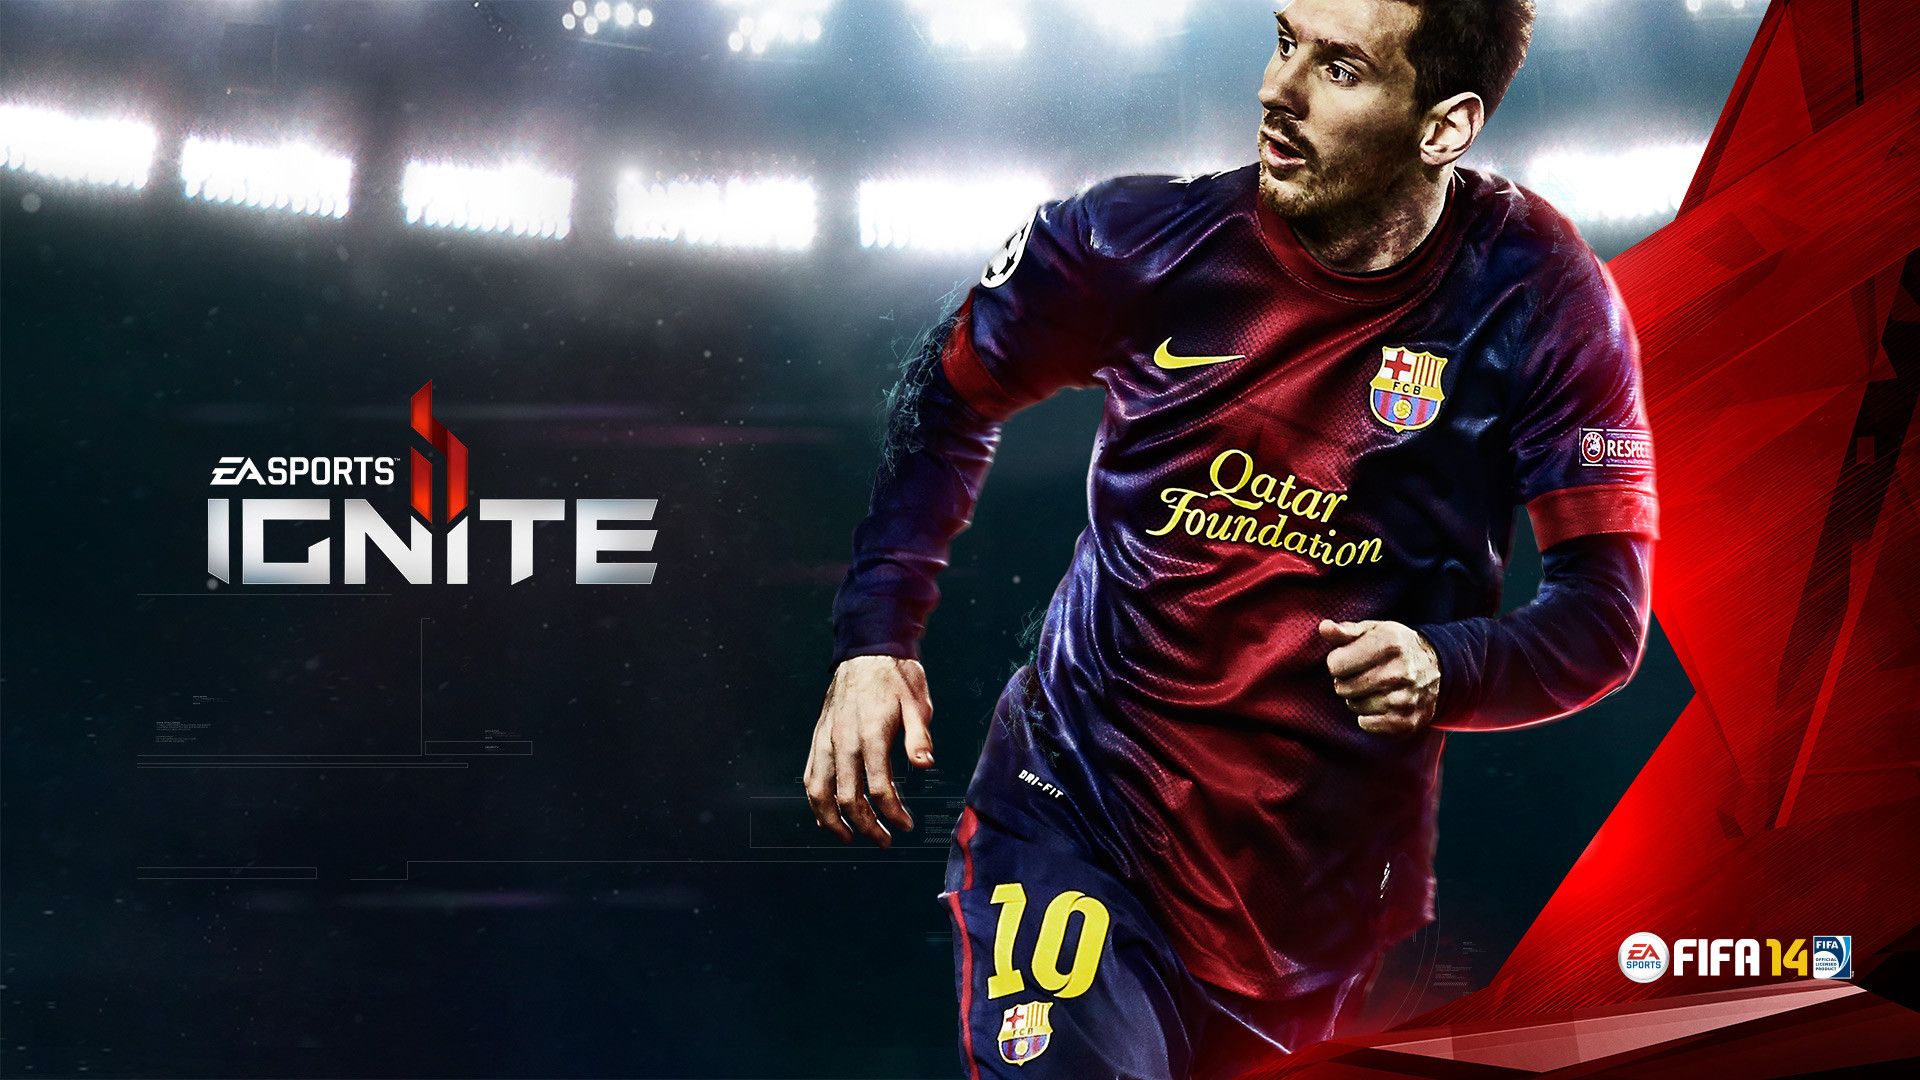 messi wallpaper free download,football player,soccer player,player,font,team